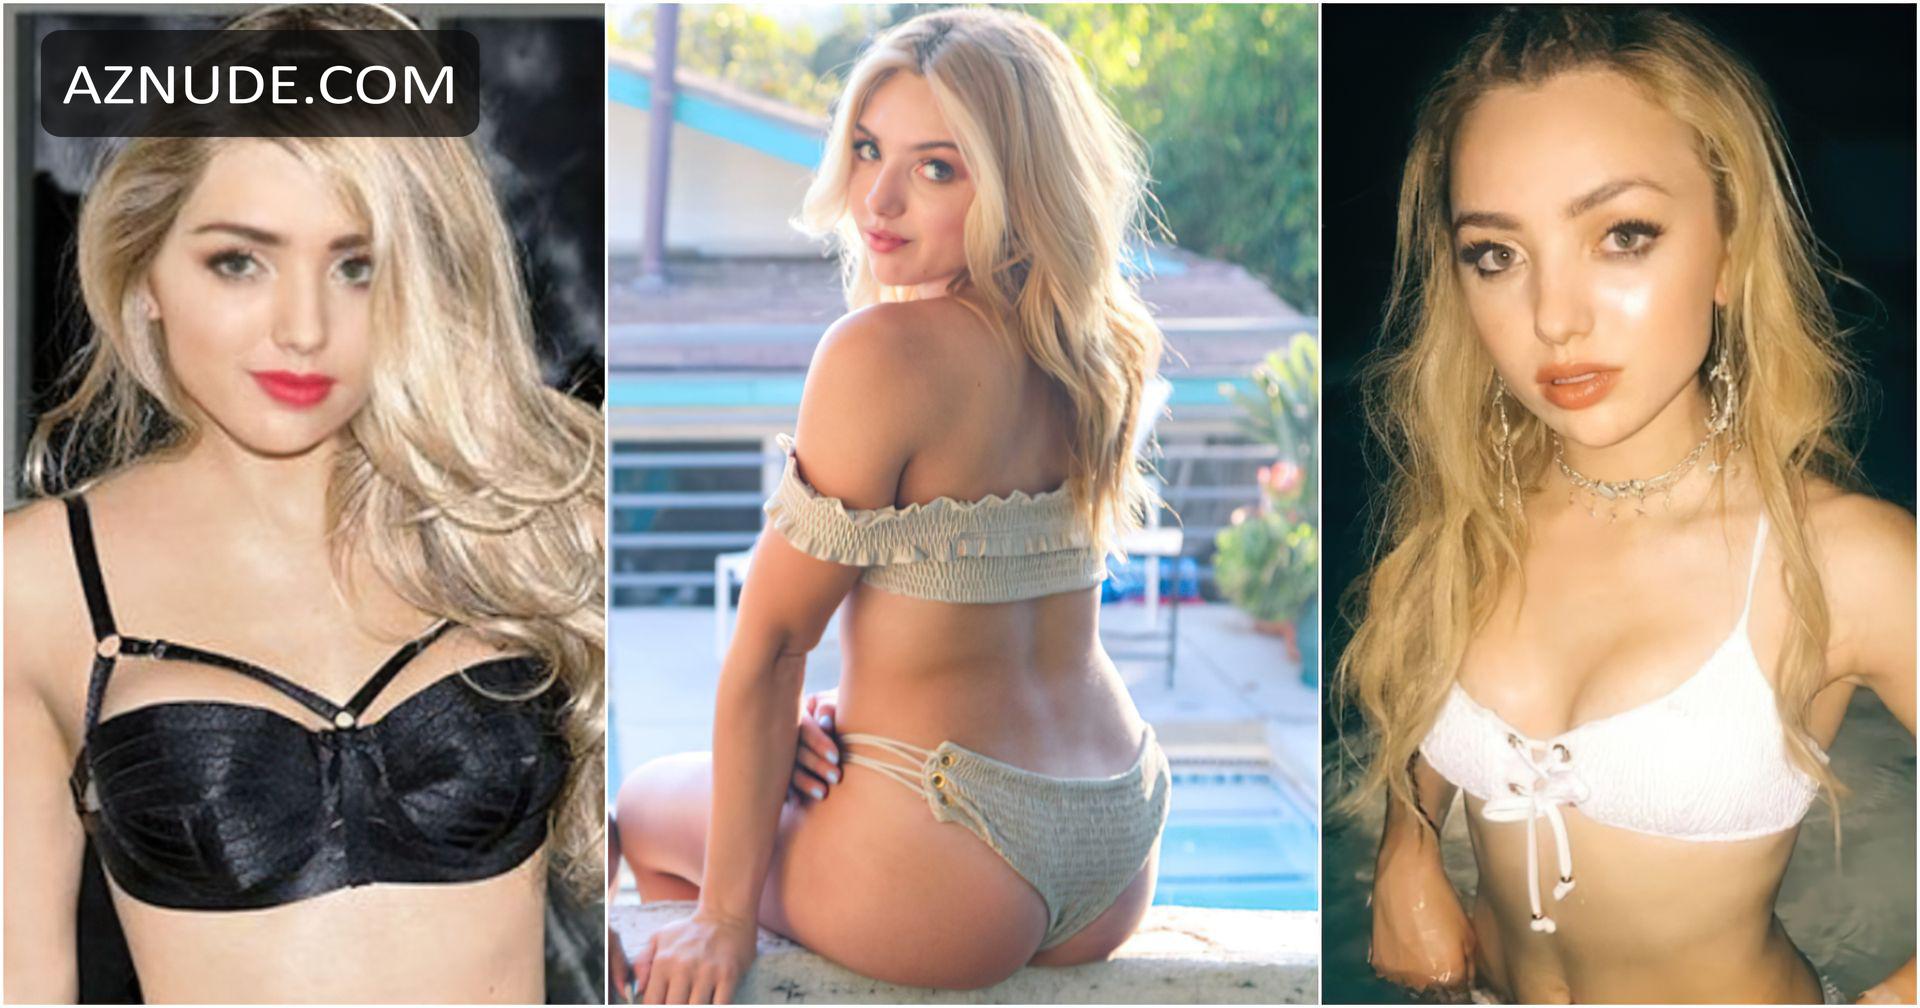 cheryl moeller recommends naked peyton list pic